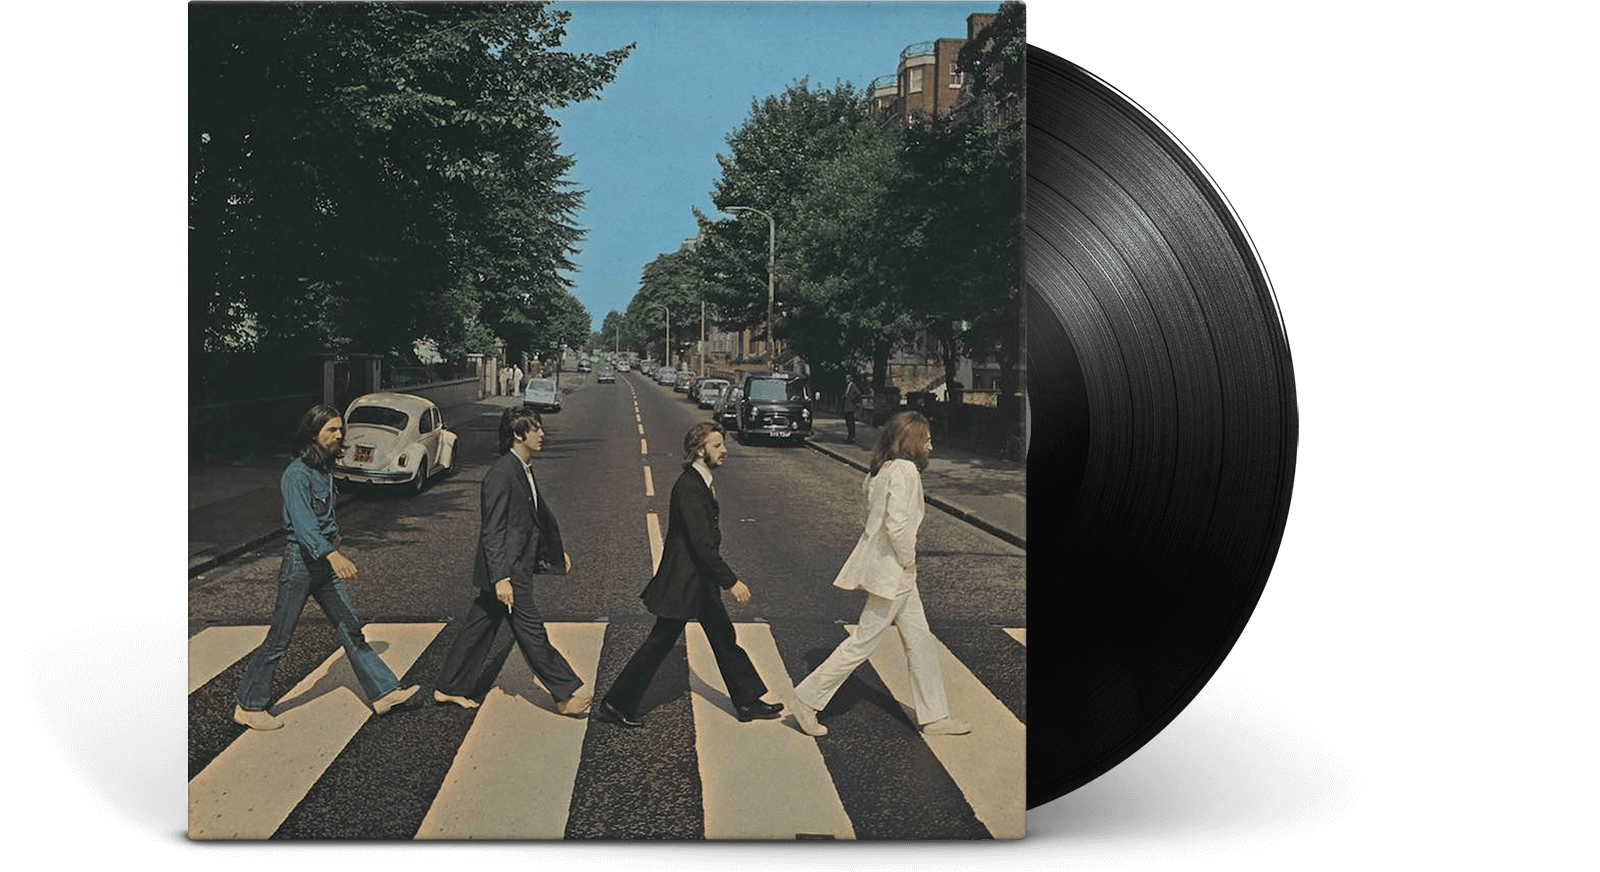 The Beatles' 'Abbey Road' Reissue Reviewed: The Anniversary It Deserves